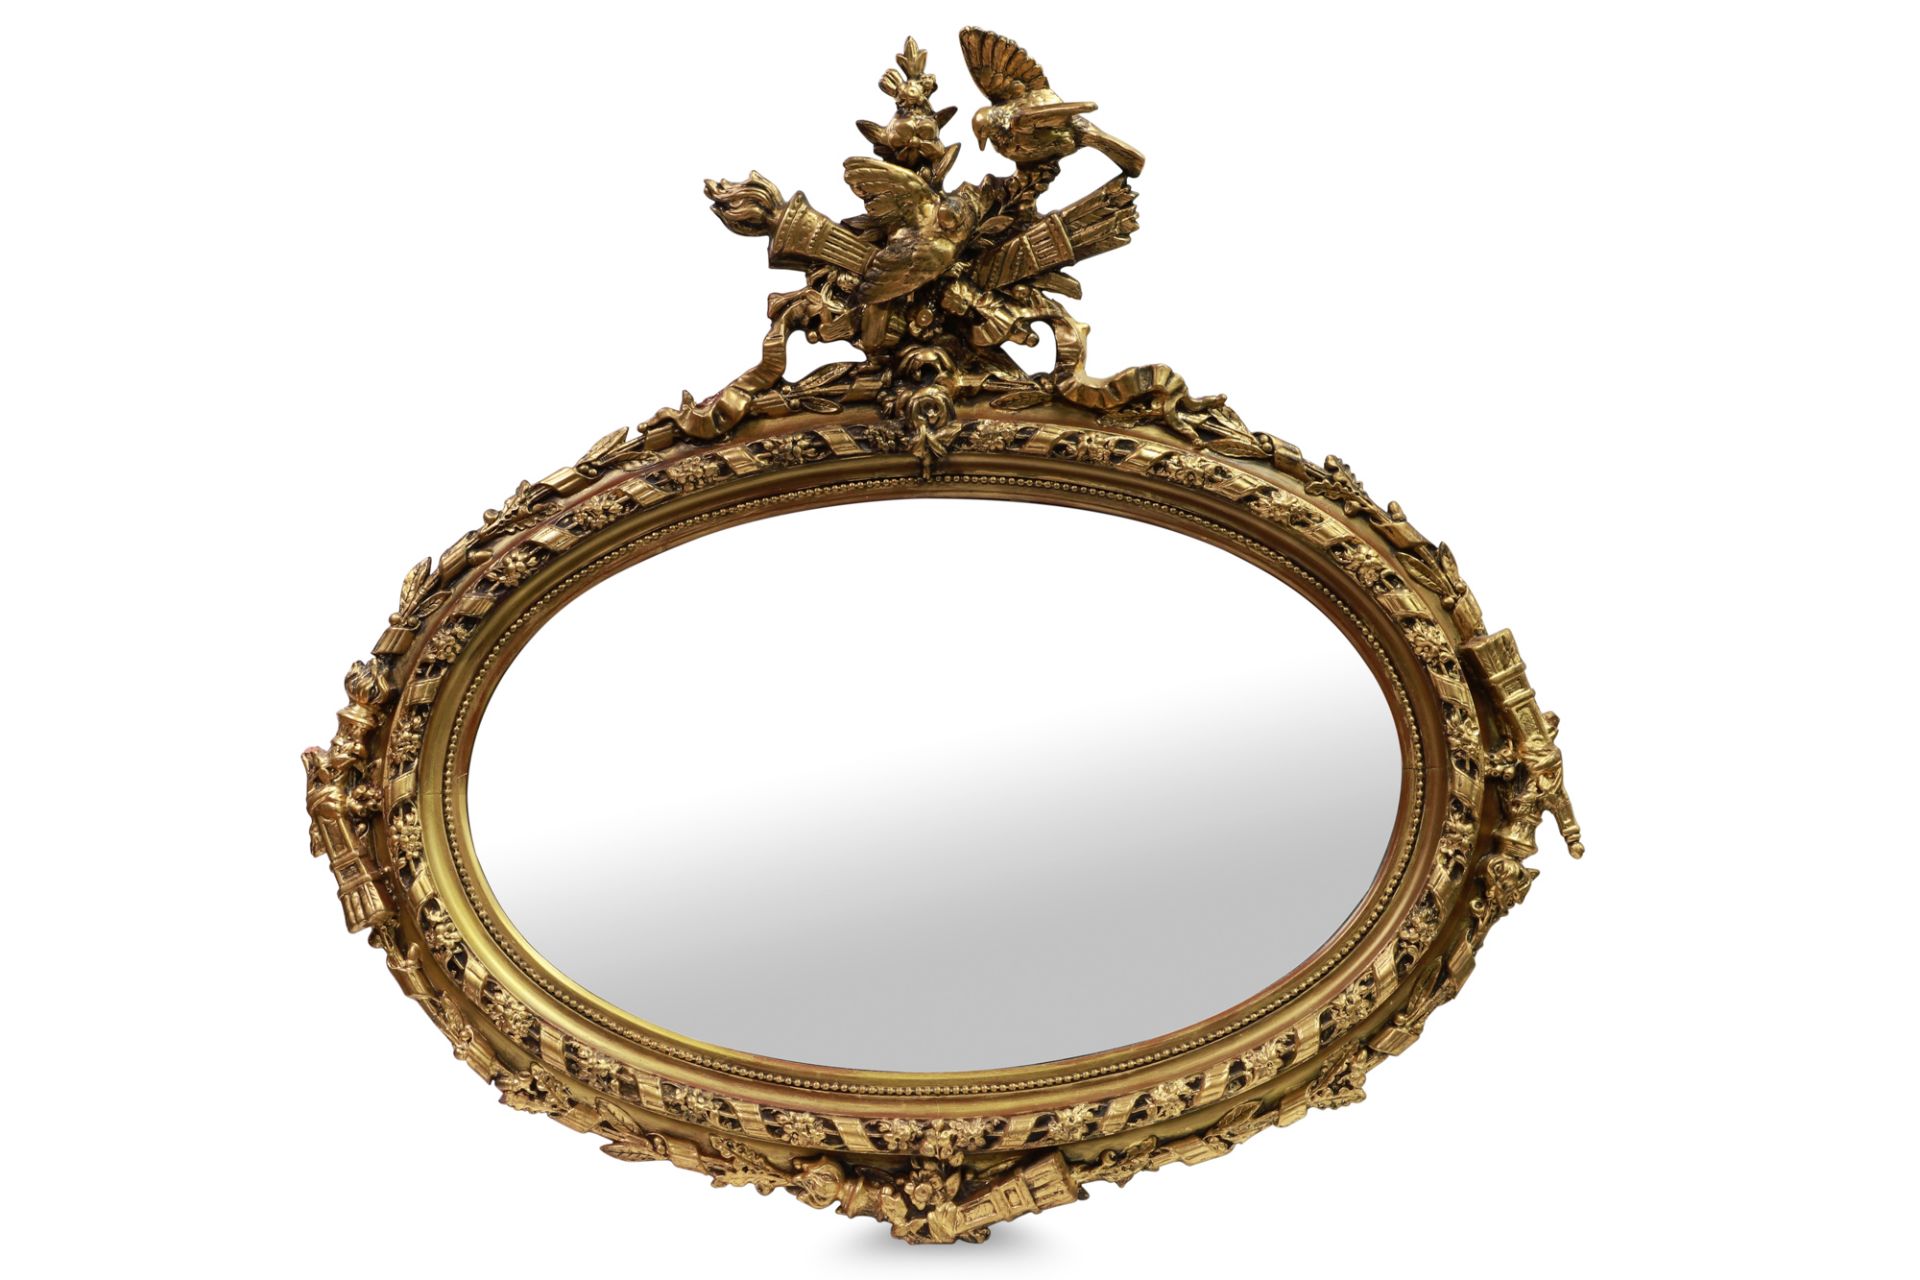 AN IMPRESSIVE 19TH CENTURY EMPIRE STYLE MIRROR, gilt & gesso oval shape, surmounted by Neo Classical